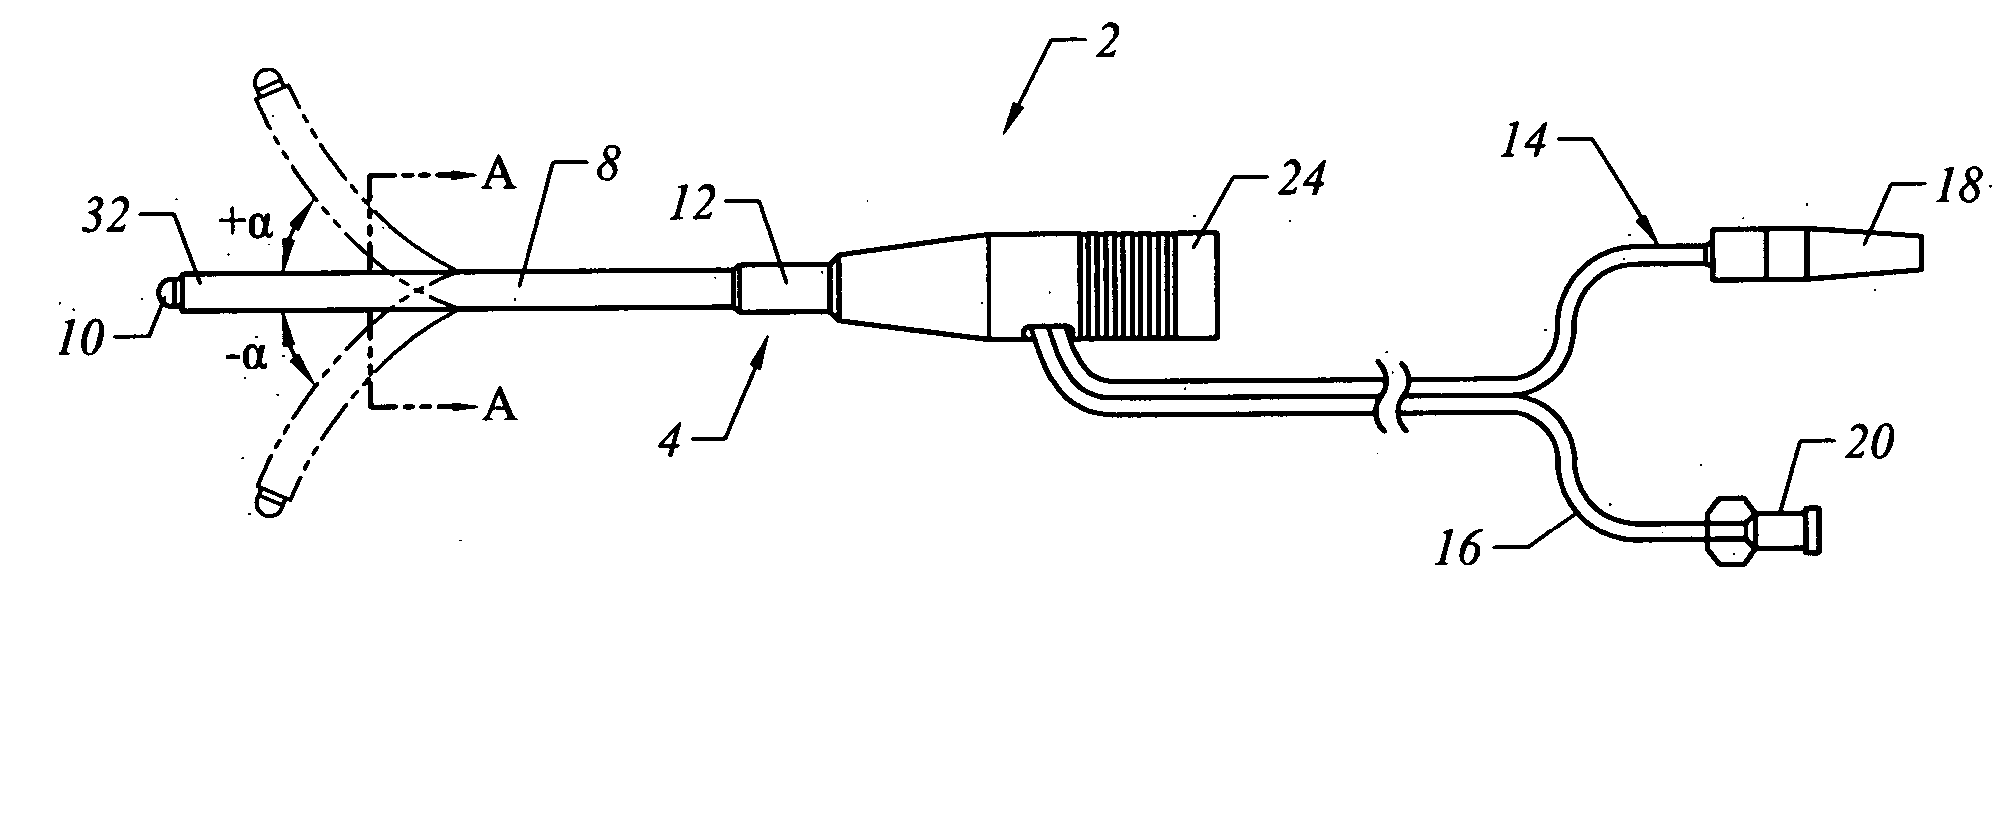 Devices and methods for selective orientation of electrosurgical devices